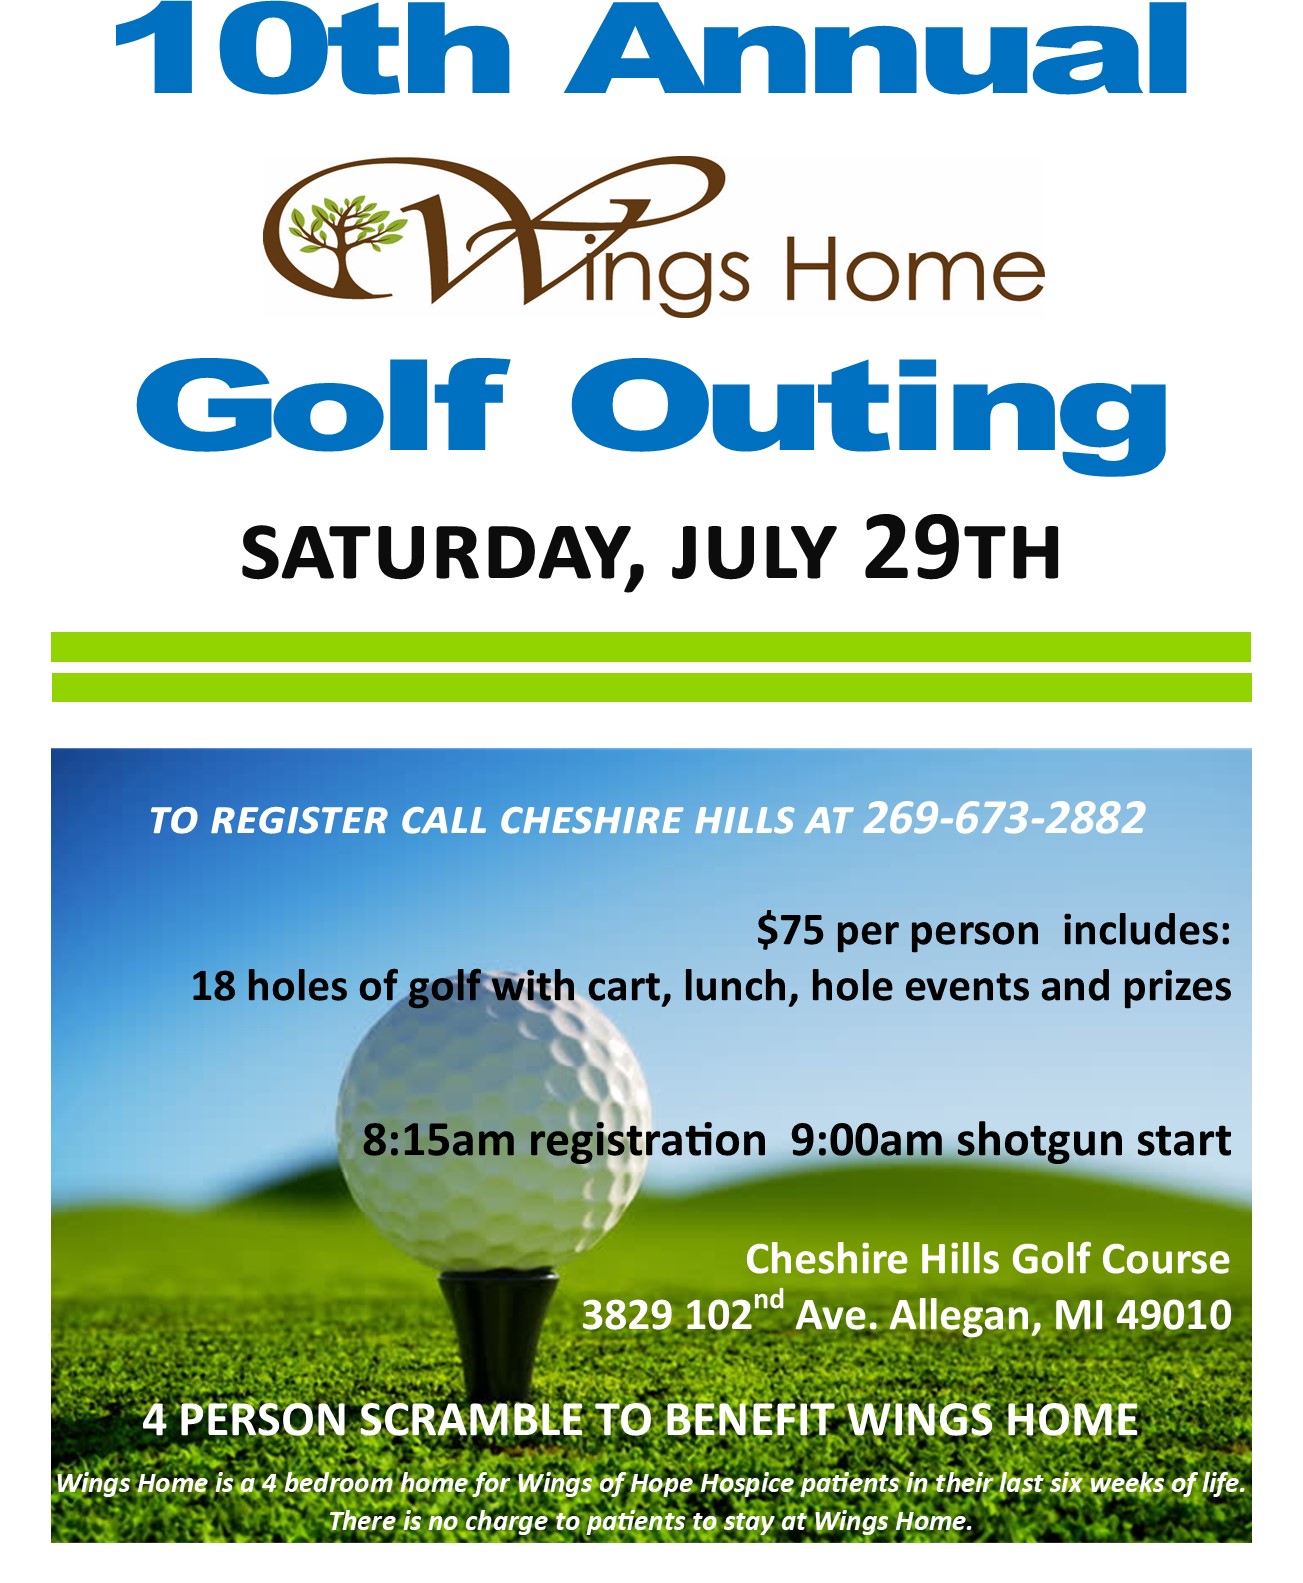 Information about the Wings Home Golf Outing